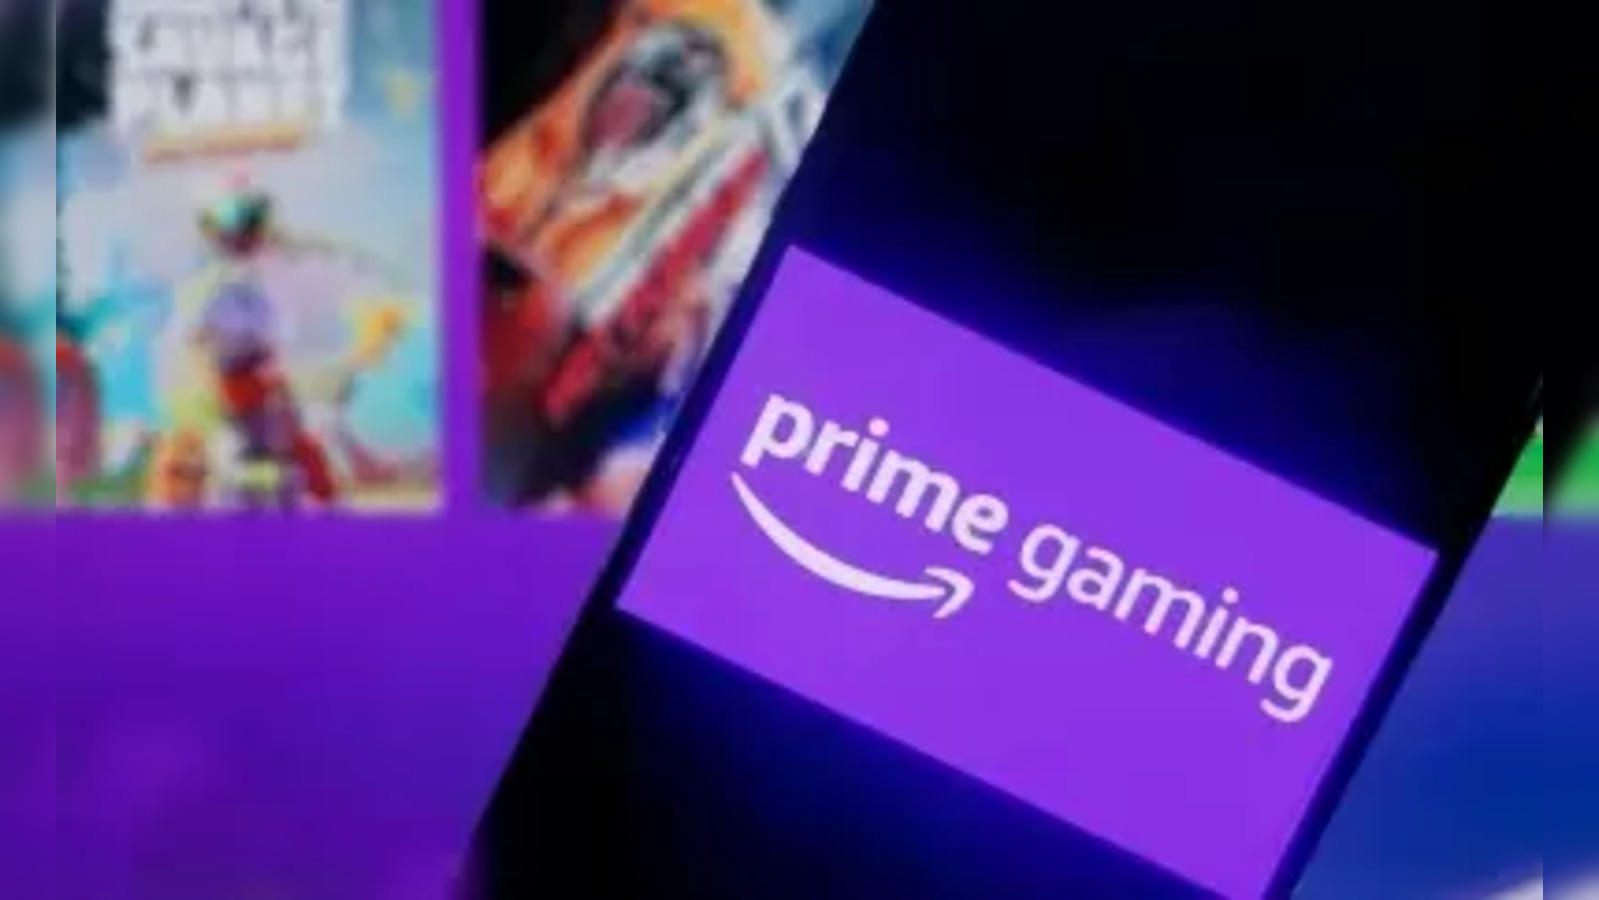 Twitch Offering Up Free Games For Prime Users, Starting This Week